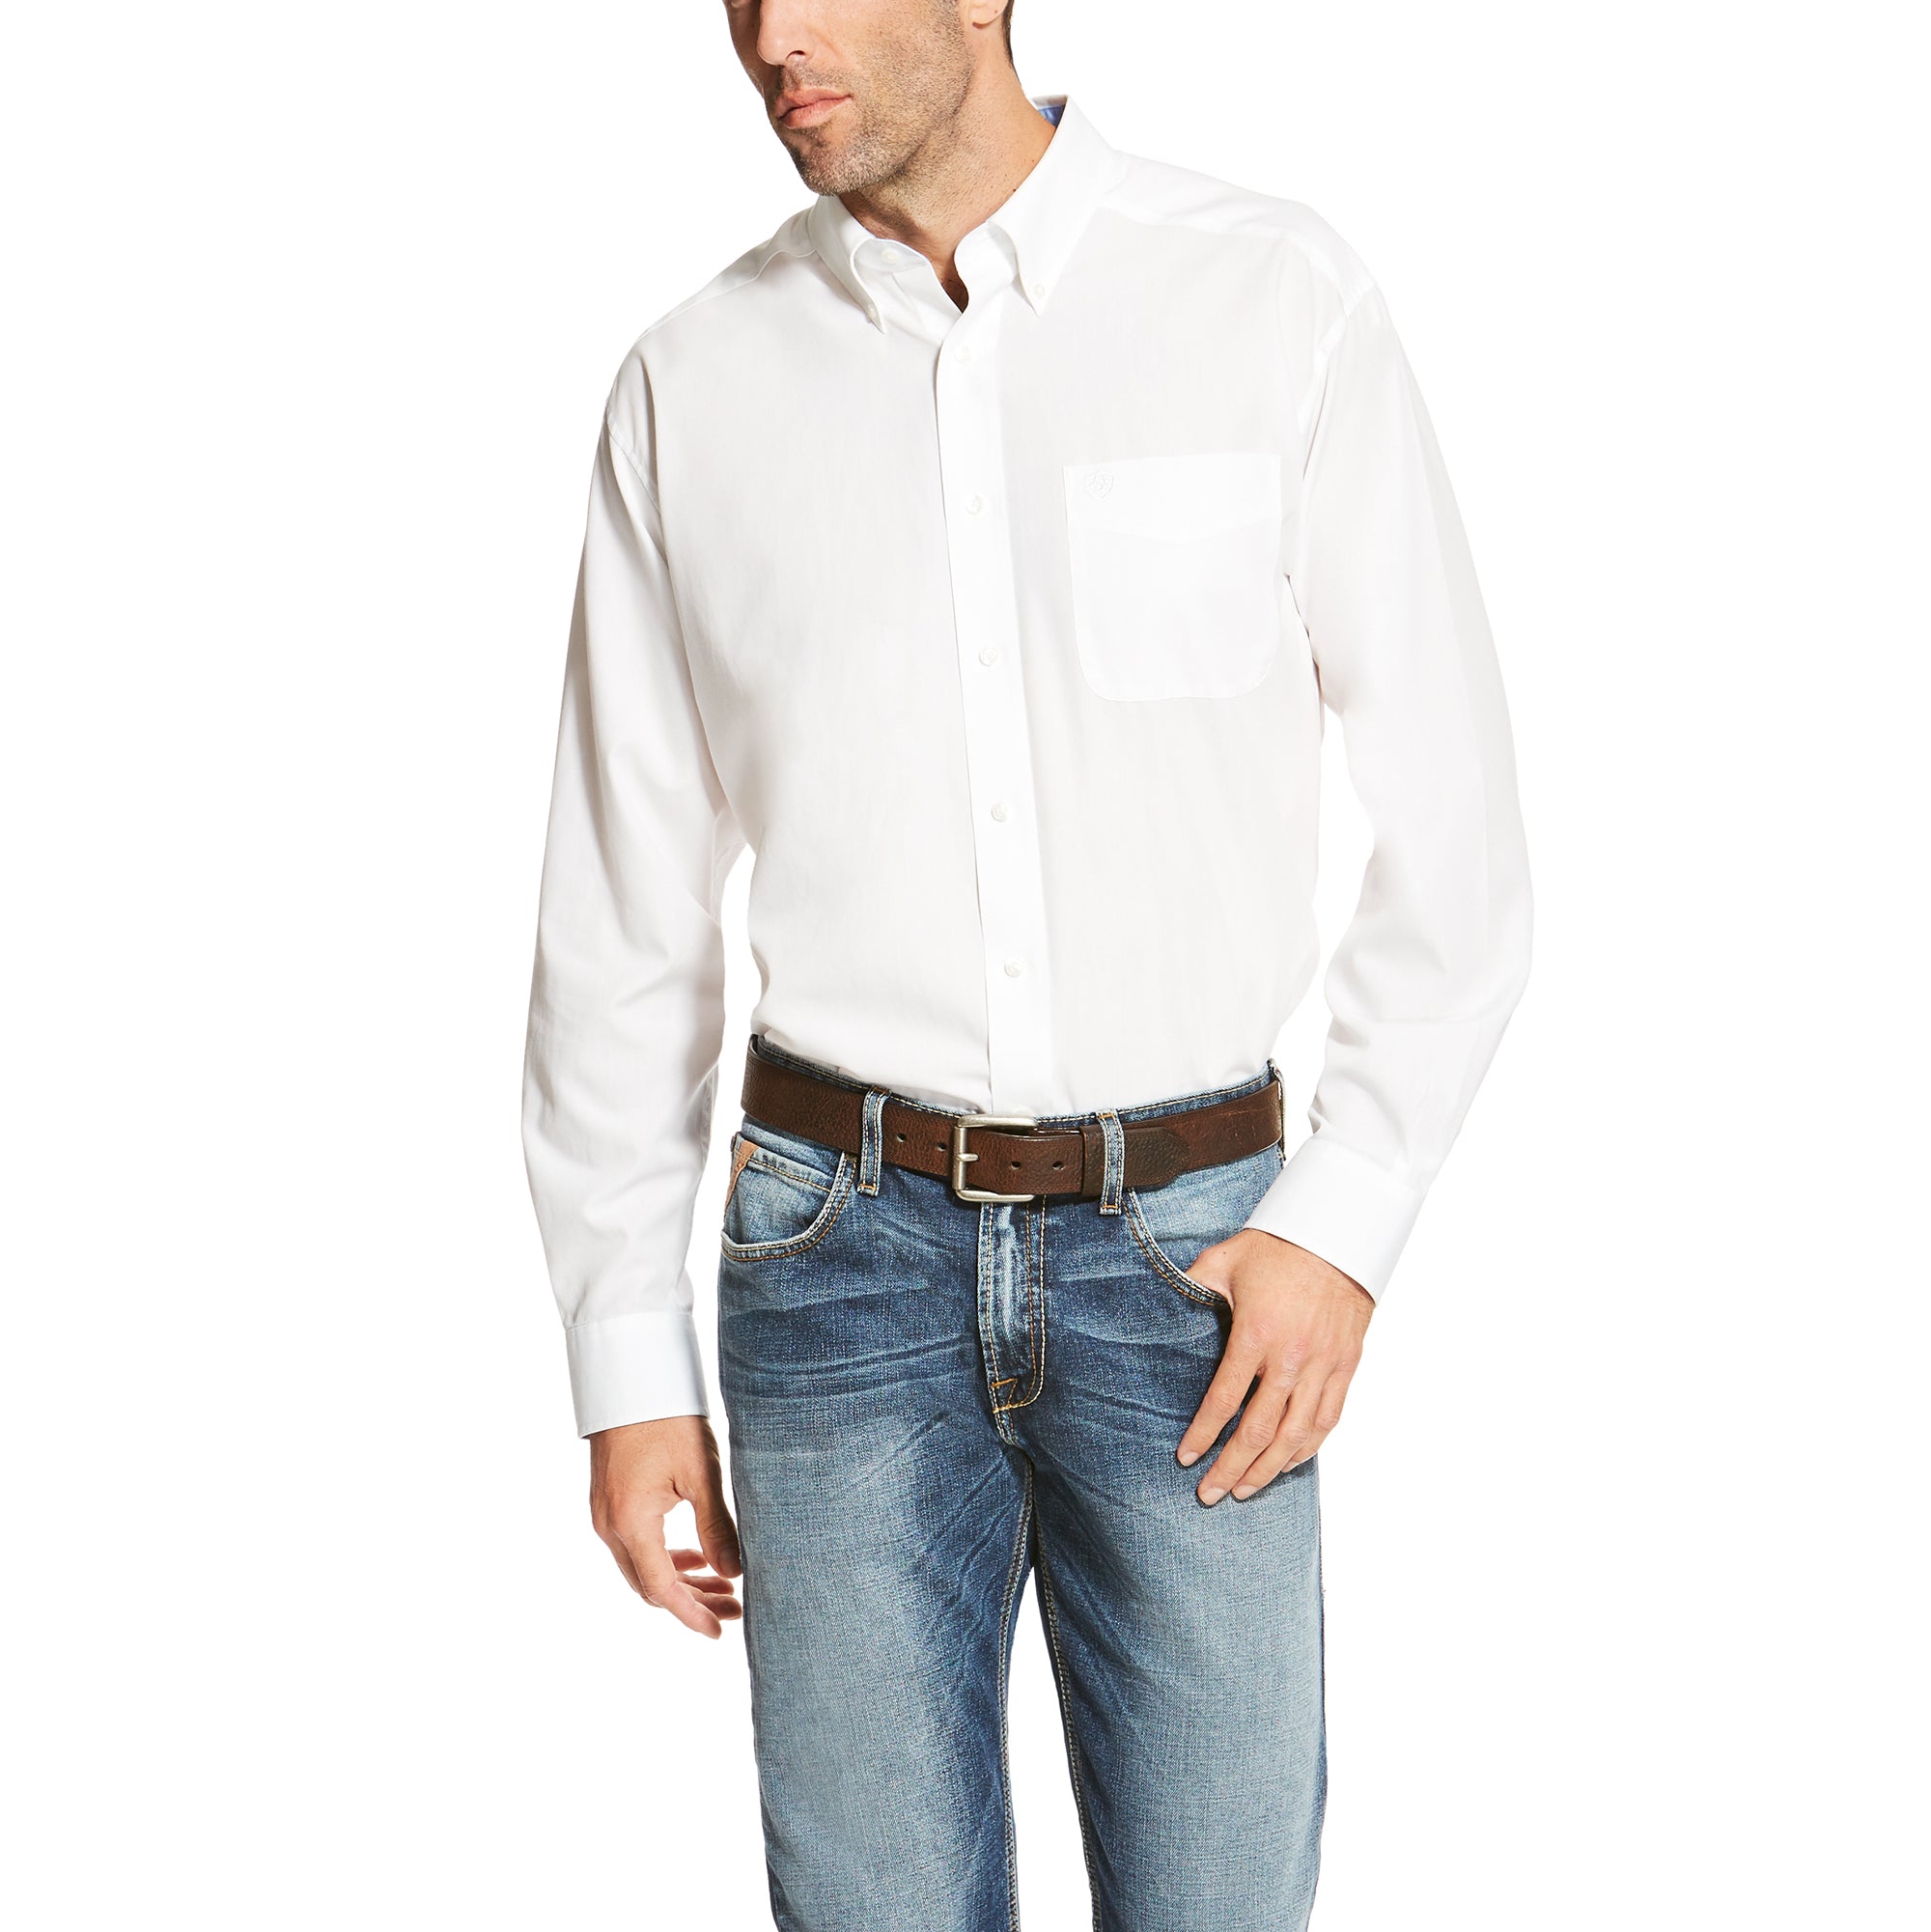 Ariat Wrinkle Free Solid Shirt